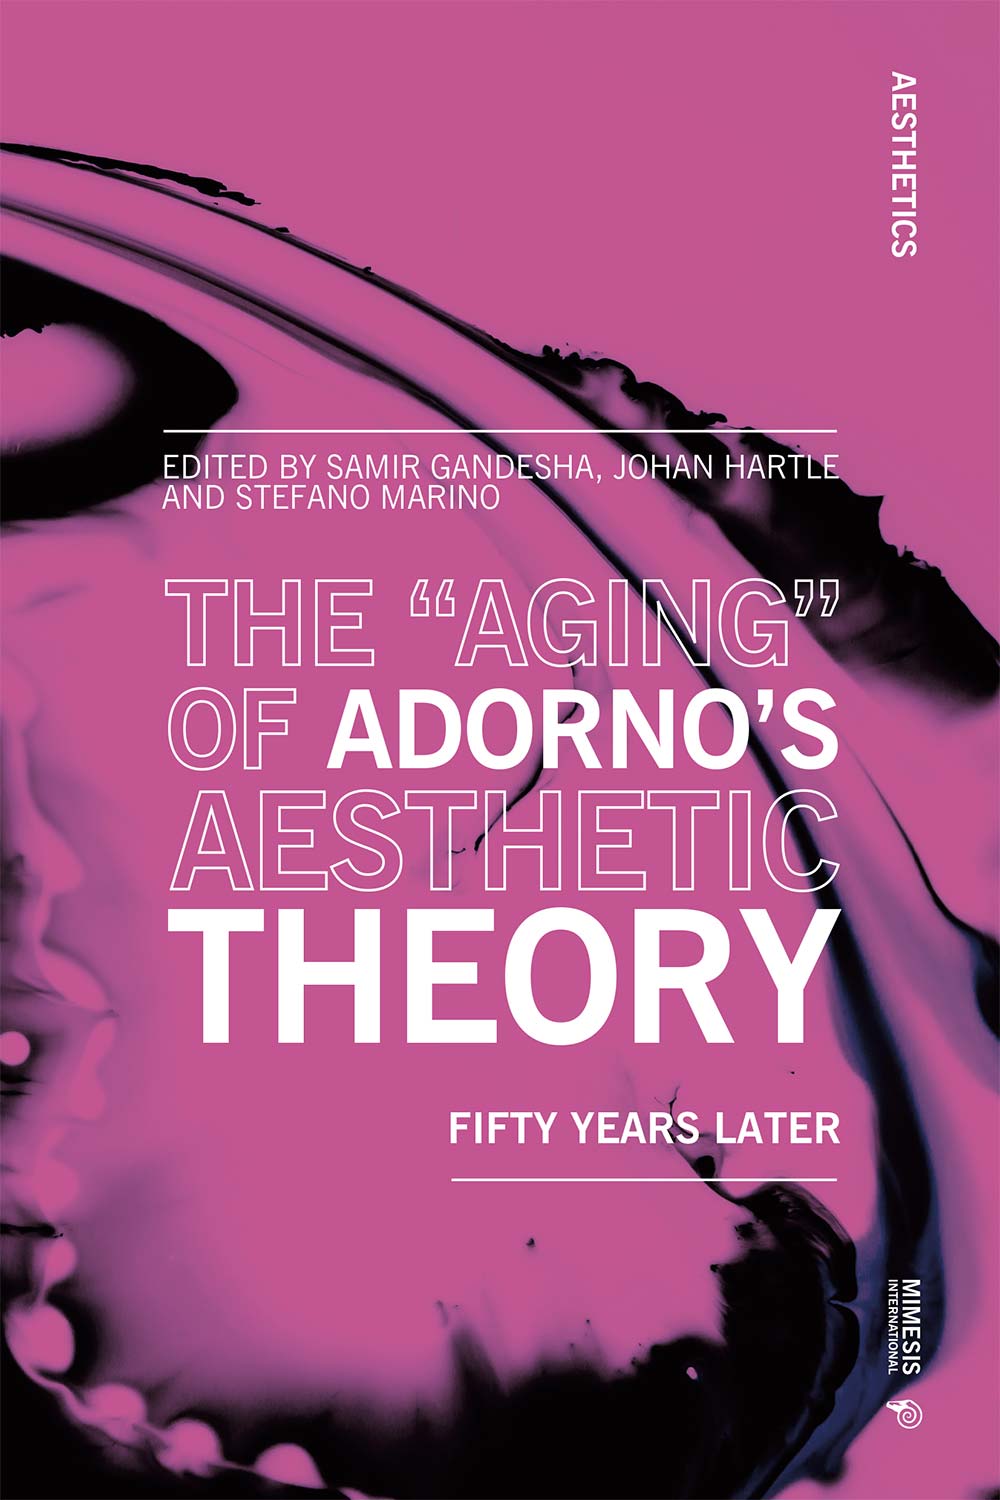 The “aging” of Adorno’s Aesthetic Theory. Fifty Years Later